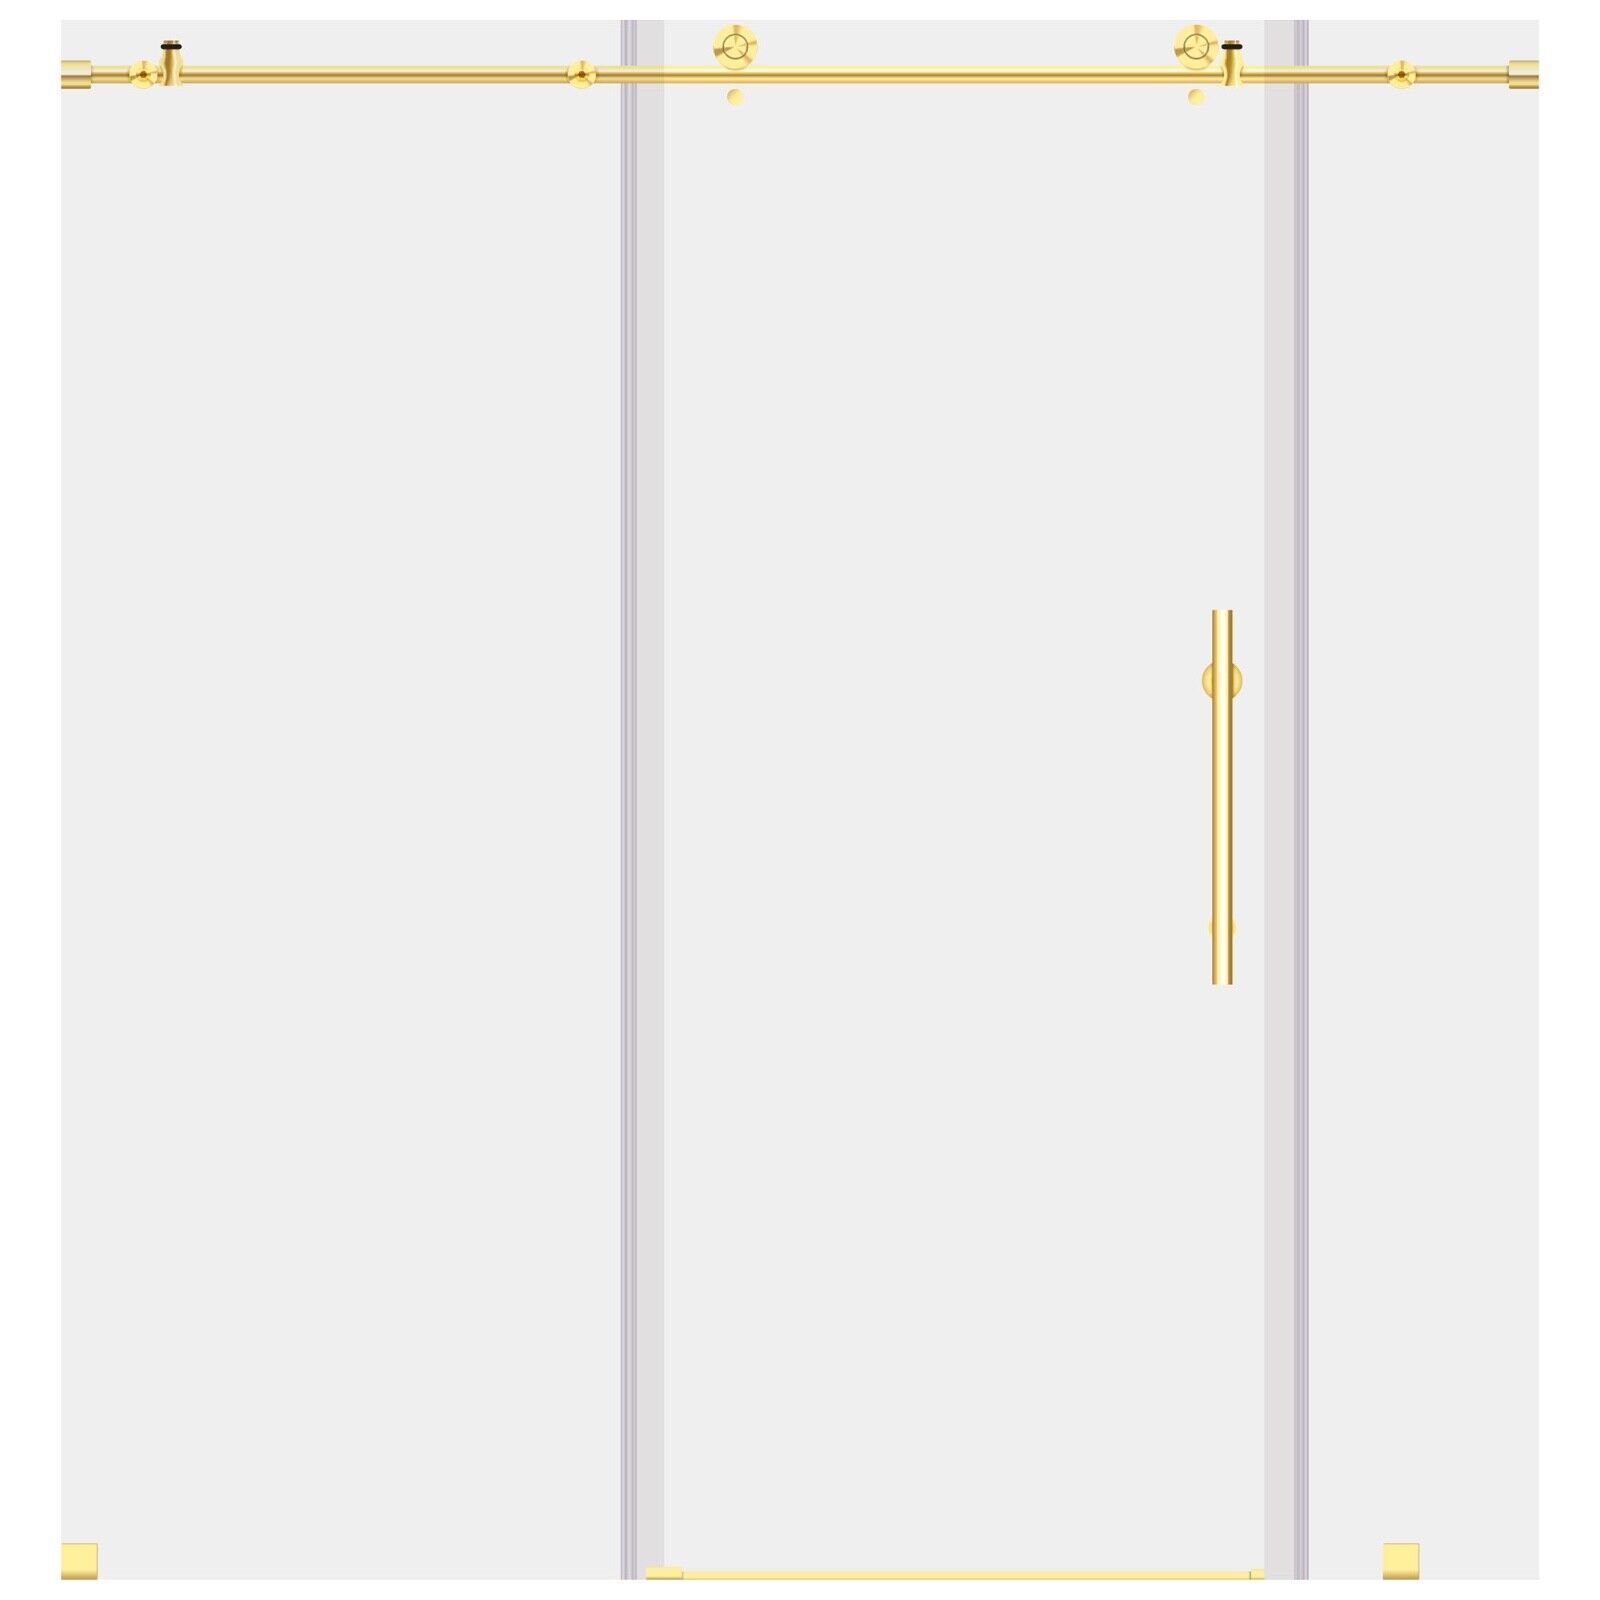 Primary image for 68-72"Wx76"H Frameless Sliding Shower Door ULTRA-C Gold by LessCare